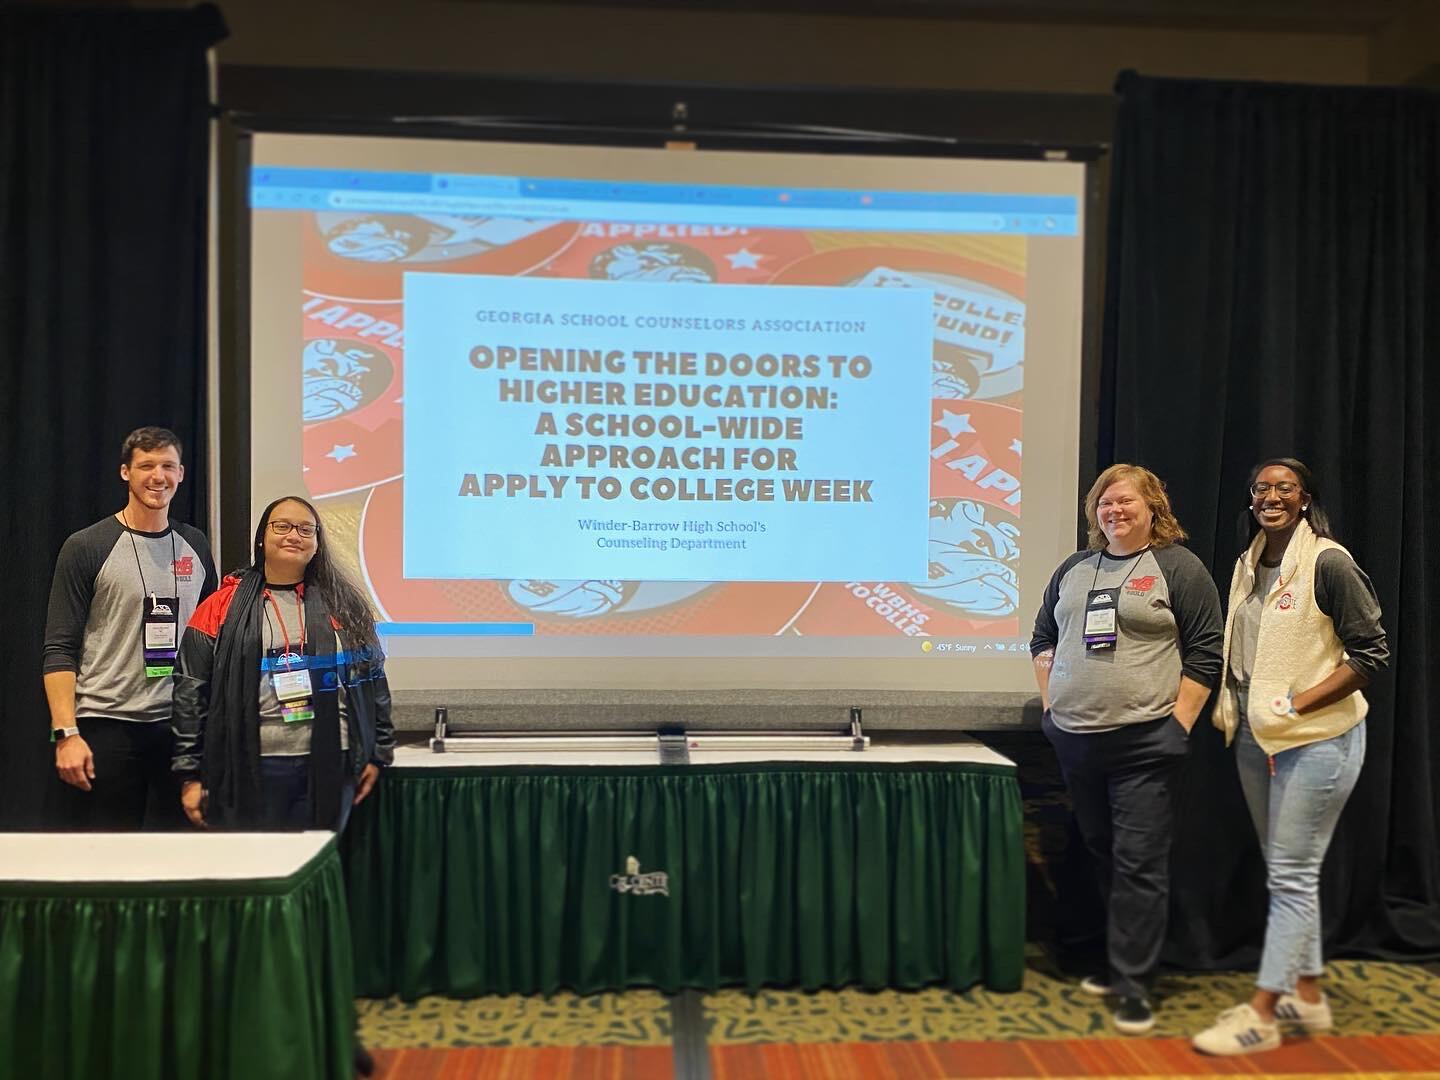 WBHS Counselors were presenters at the GA School Counseling Assoc. 2021 Conference